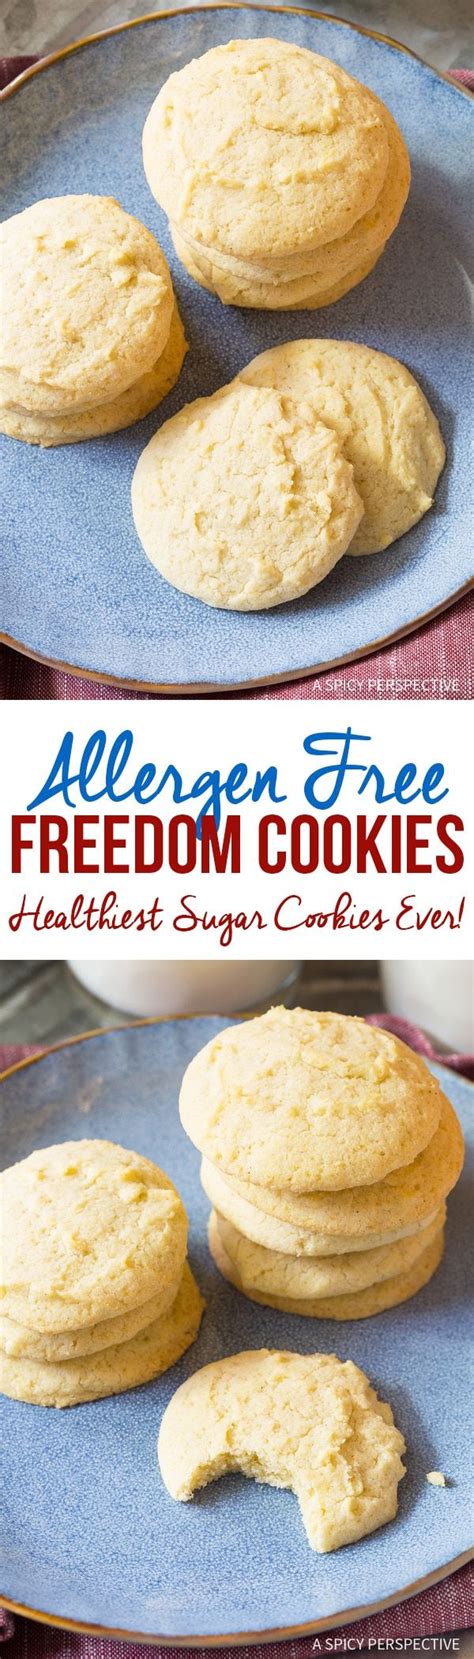 Some sugar cookie recipes online pride themselves on not having to be chilled, but we think letting the dough chill out in the fridge is an essential step—especially when what's the best recipe for icing sugar cookies? Freedom Cookies (Healthiest Sugar Cookies Ever!) This easy sugar cookie recipe tastes amazing ...